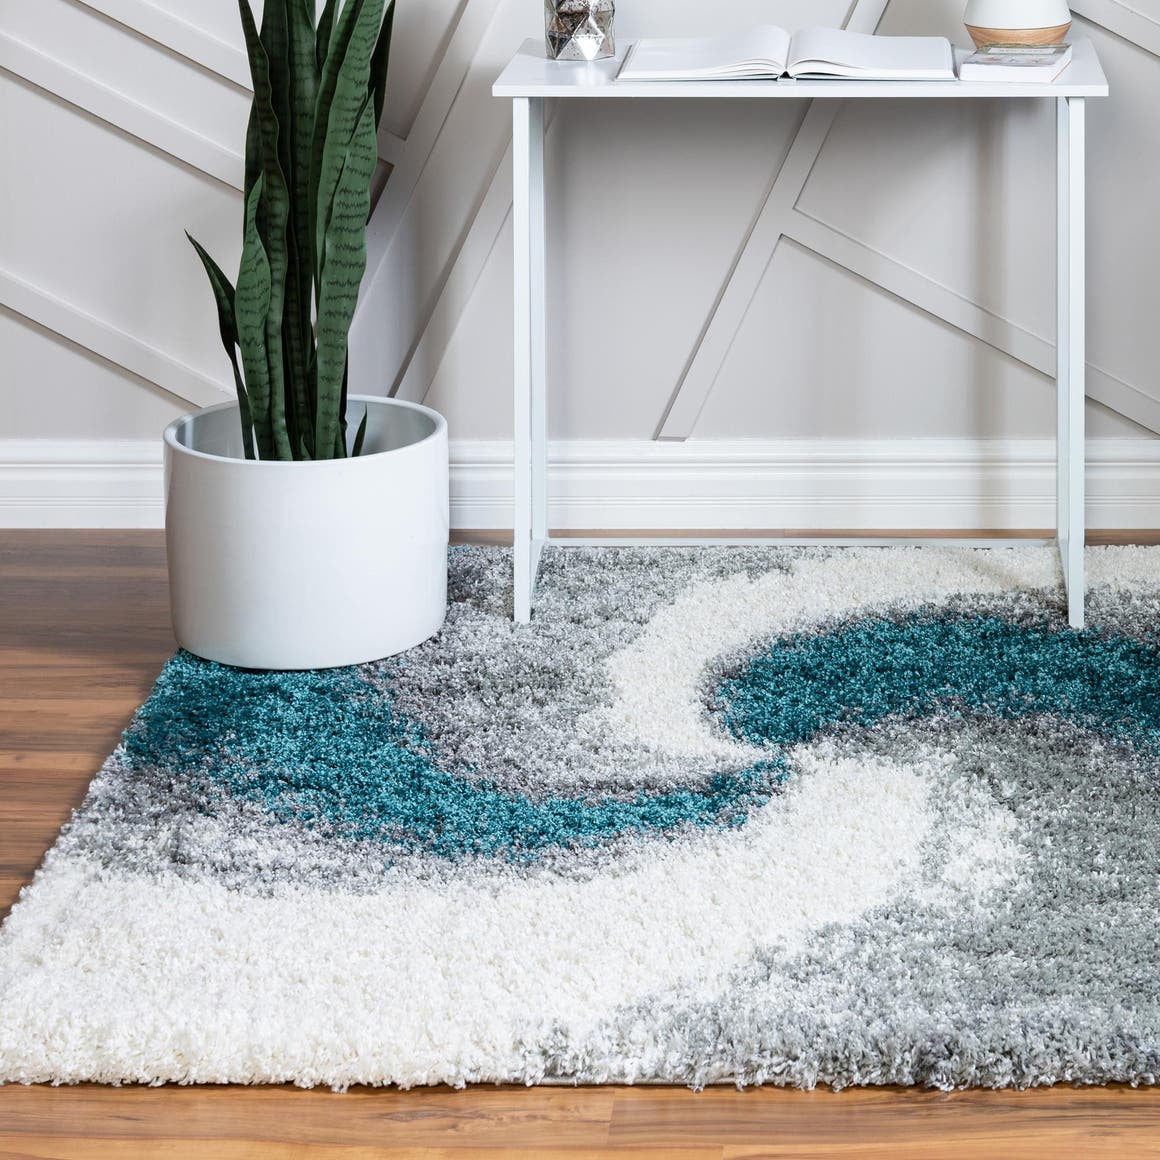 4 Ft Square Turquoise Rug Perfect, Rugs With Turquoise